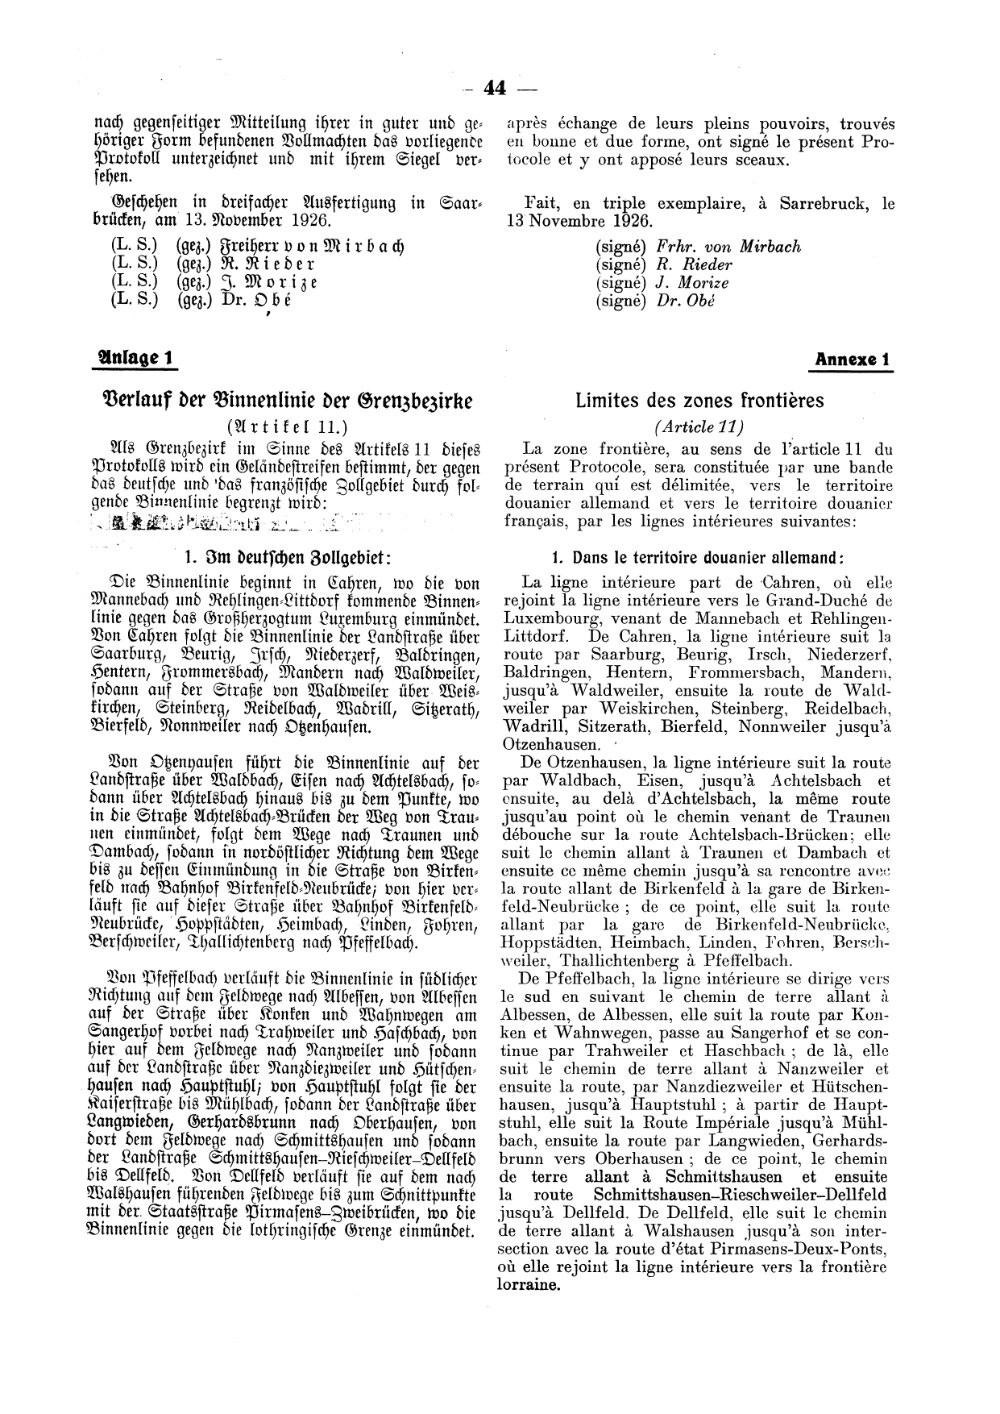 Scan of page 44